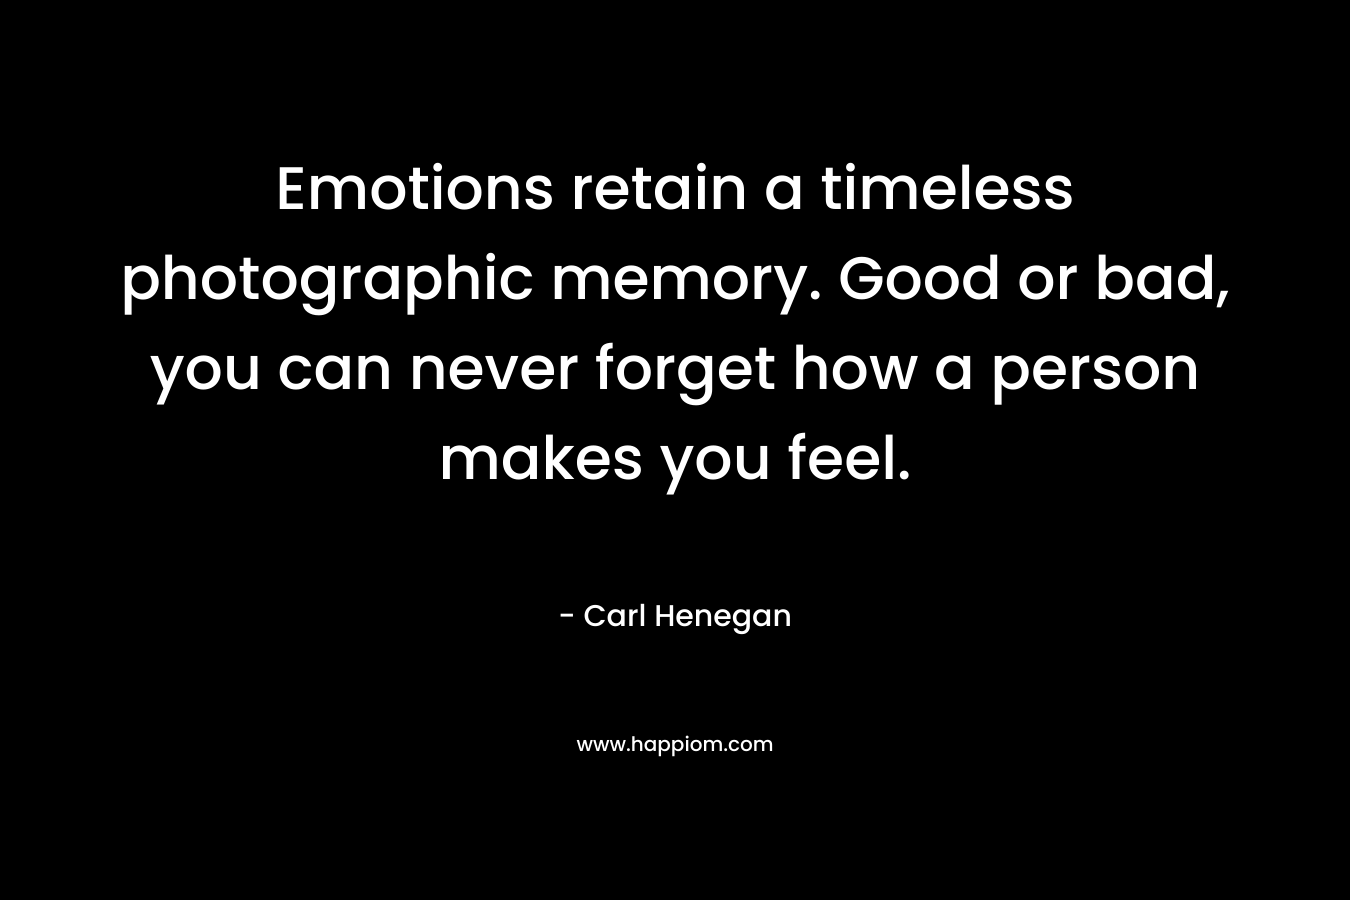 Emotions retain a timeless photographic memory. Good or bad, you can never forget how a person makes you feel.